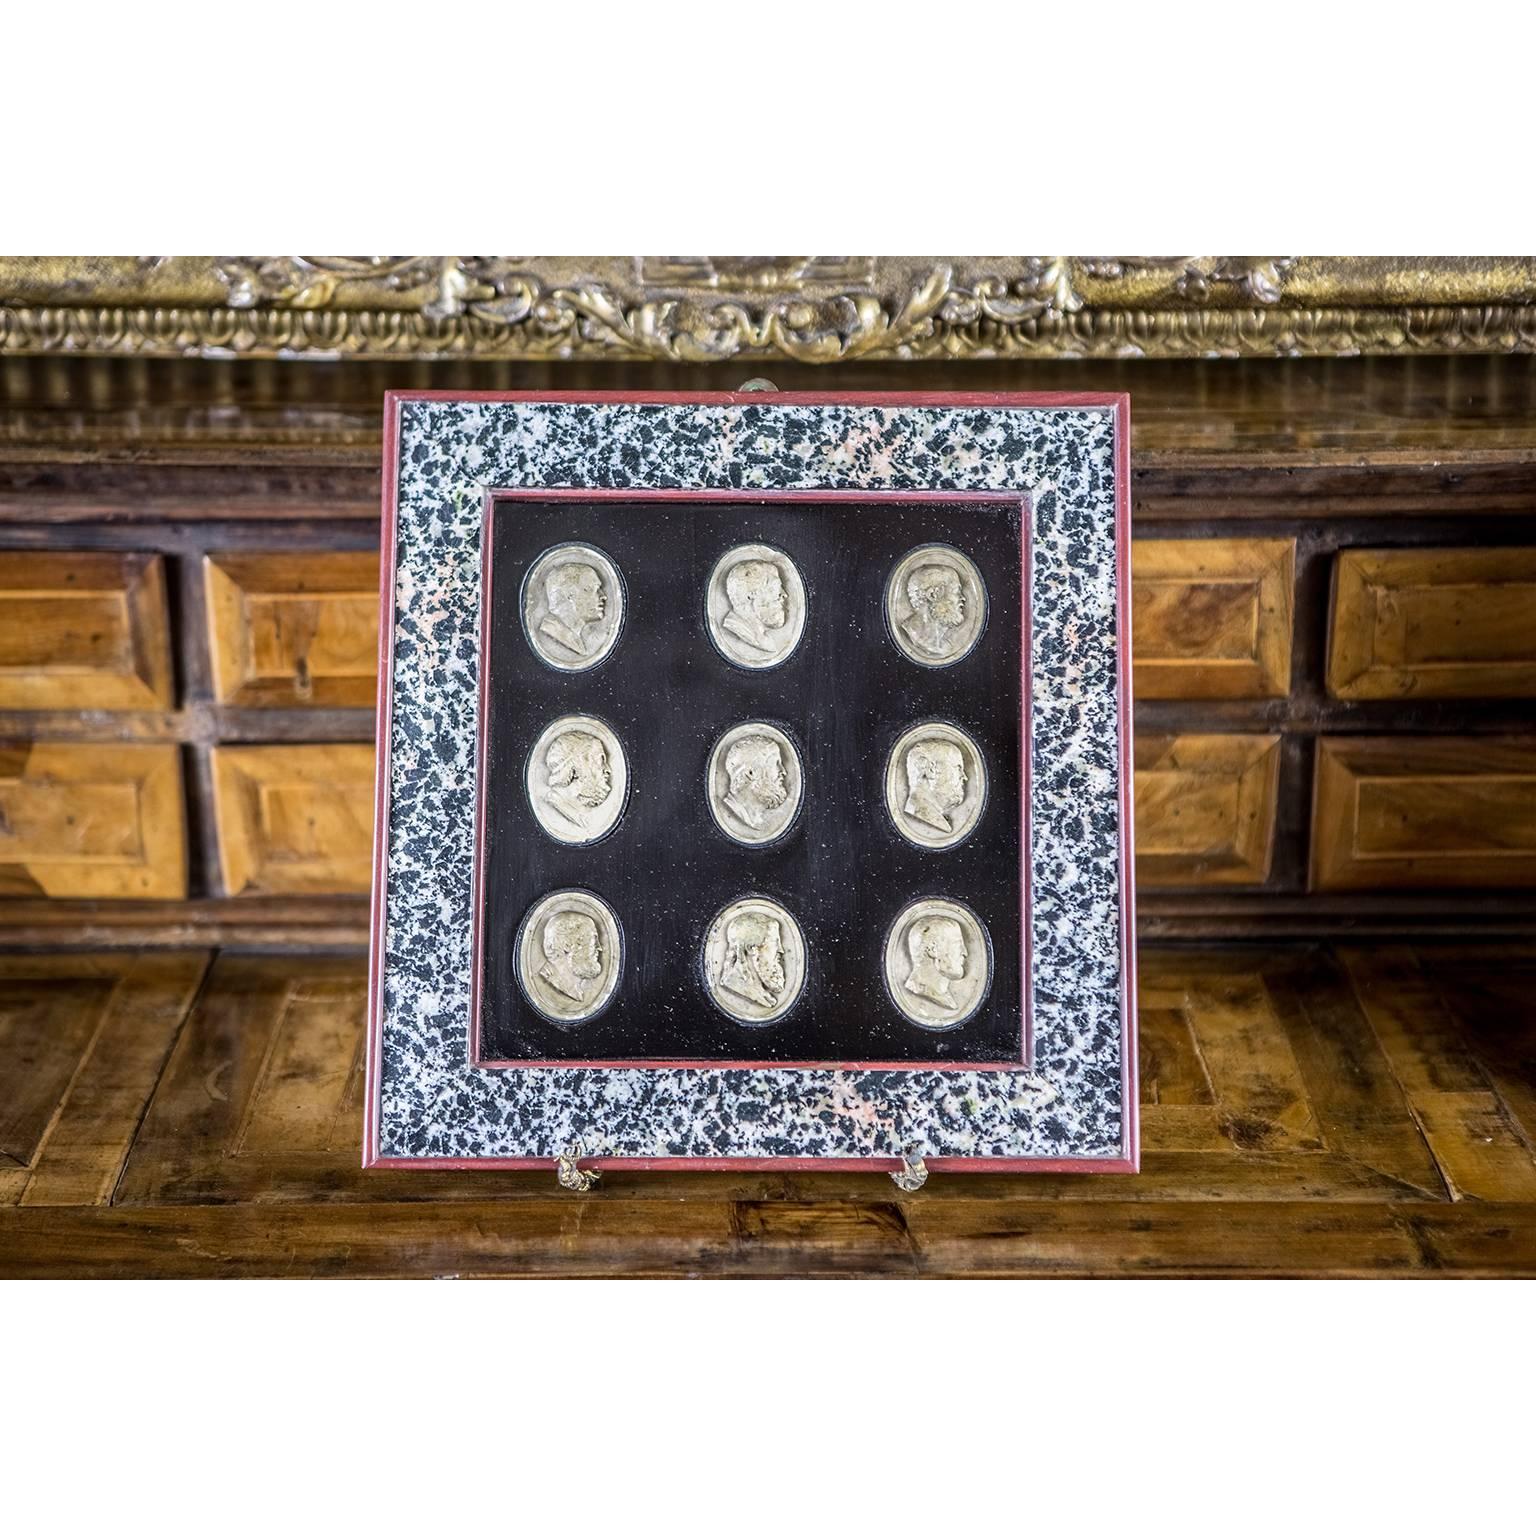 Marble Pair of Italian Intaglios 19th Century Neoclassical Grand Tour Framed Cameos